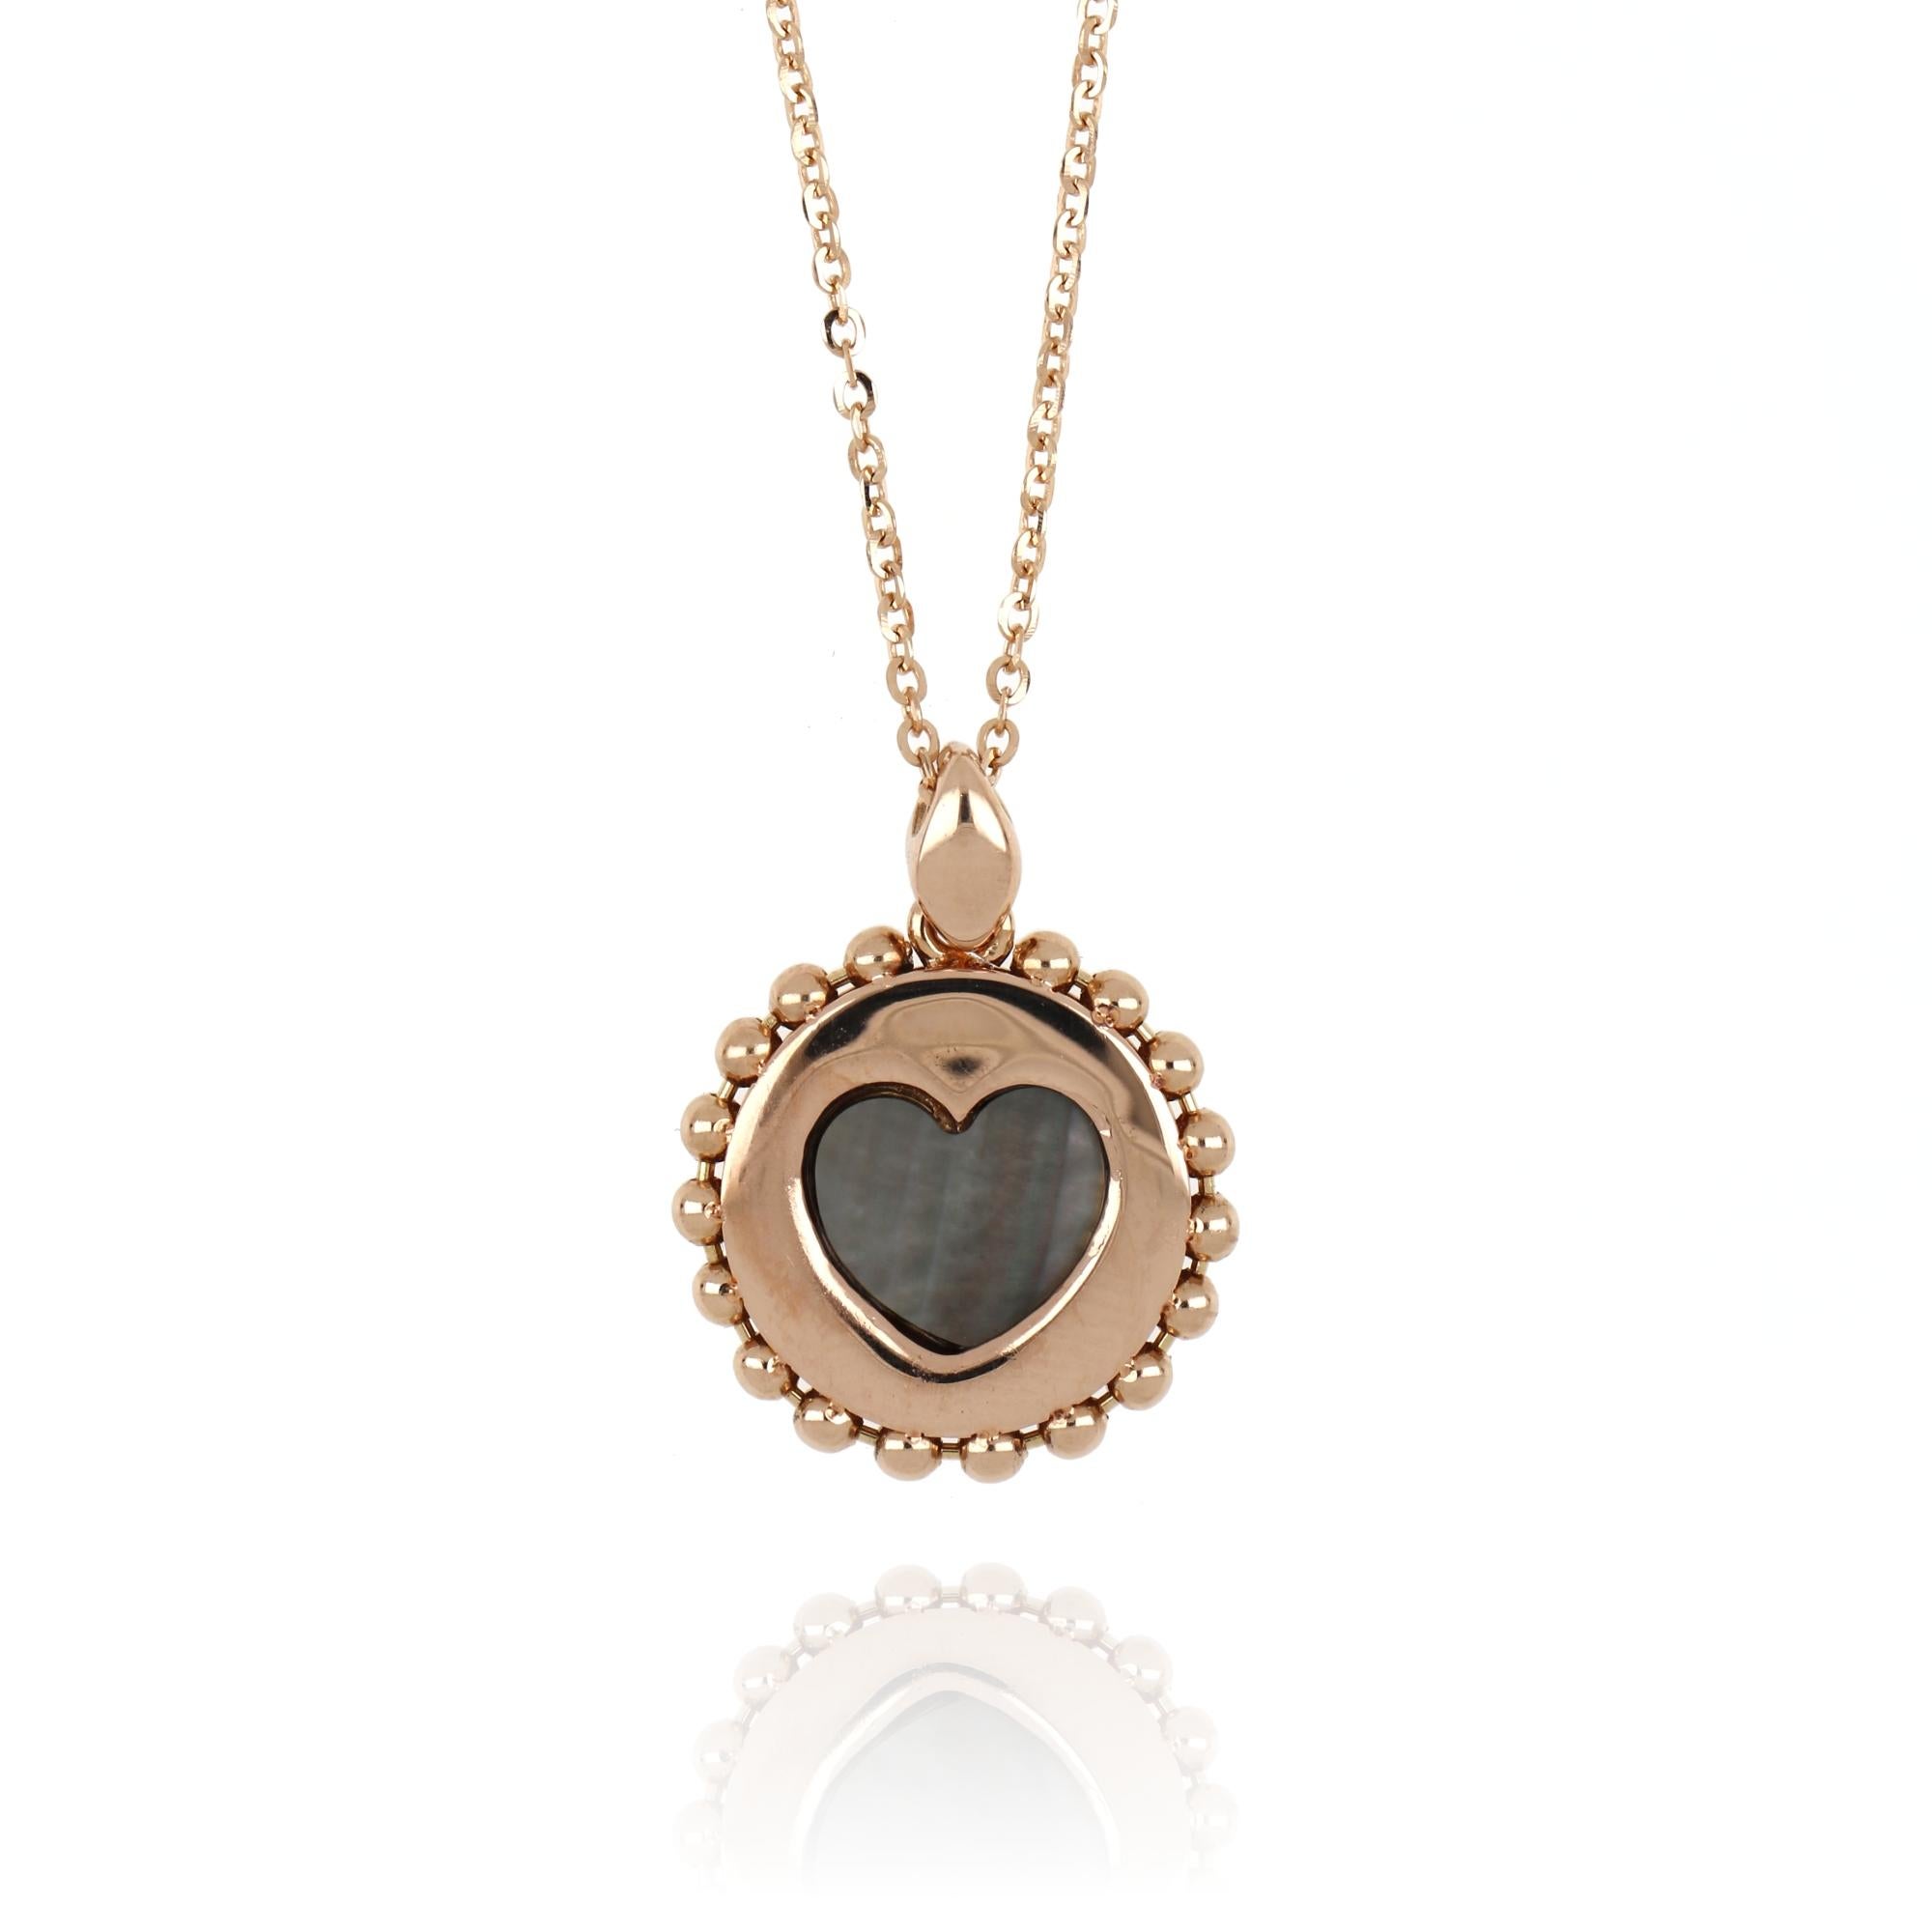 Versatile and effortlessly chic, this necklace will surprise you with its playful design. On one side the pendant features a central iridescent heart in mother-of-pearl, framed by pavé set diamonds, the perfect complement to an evening attire. The